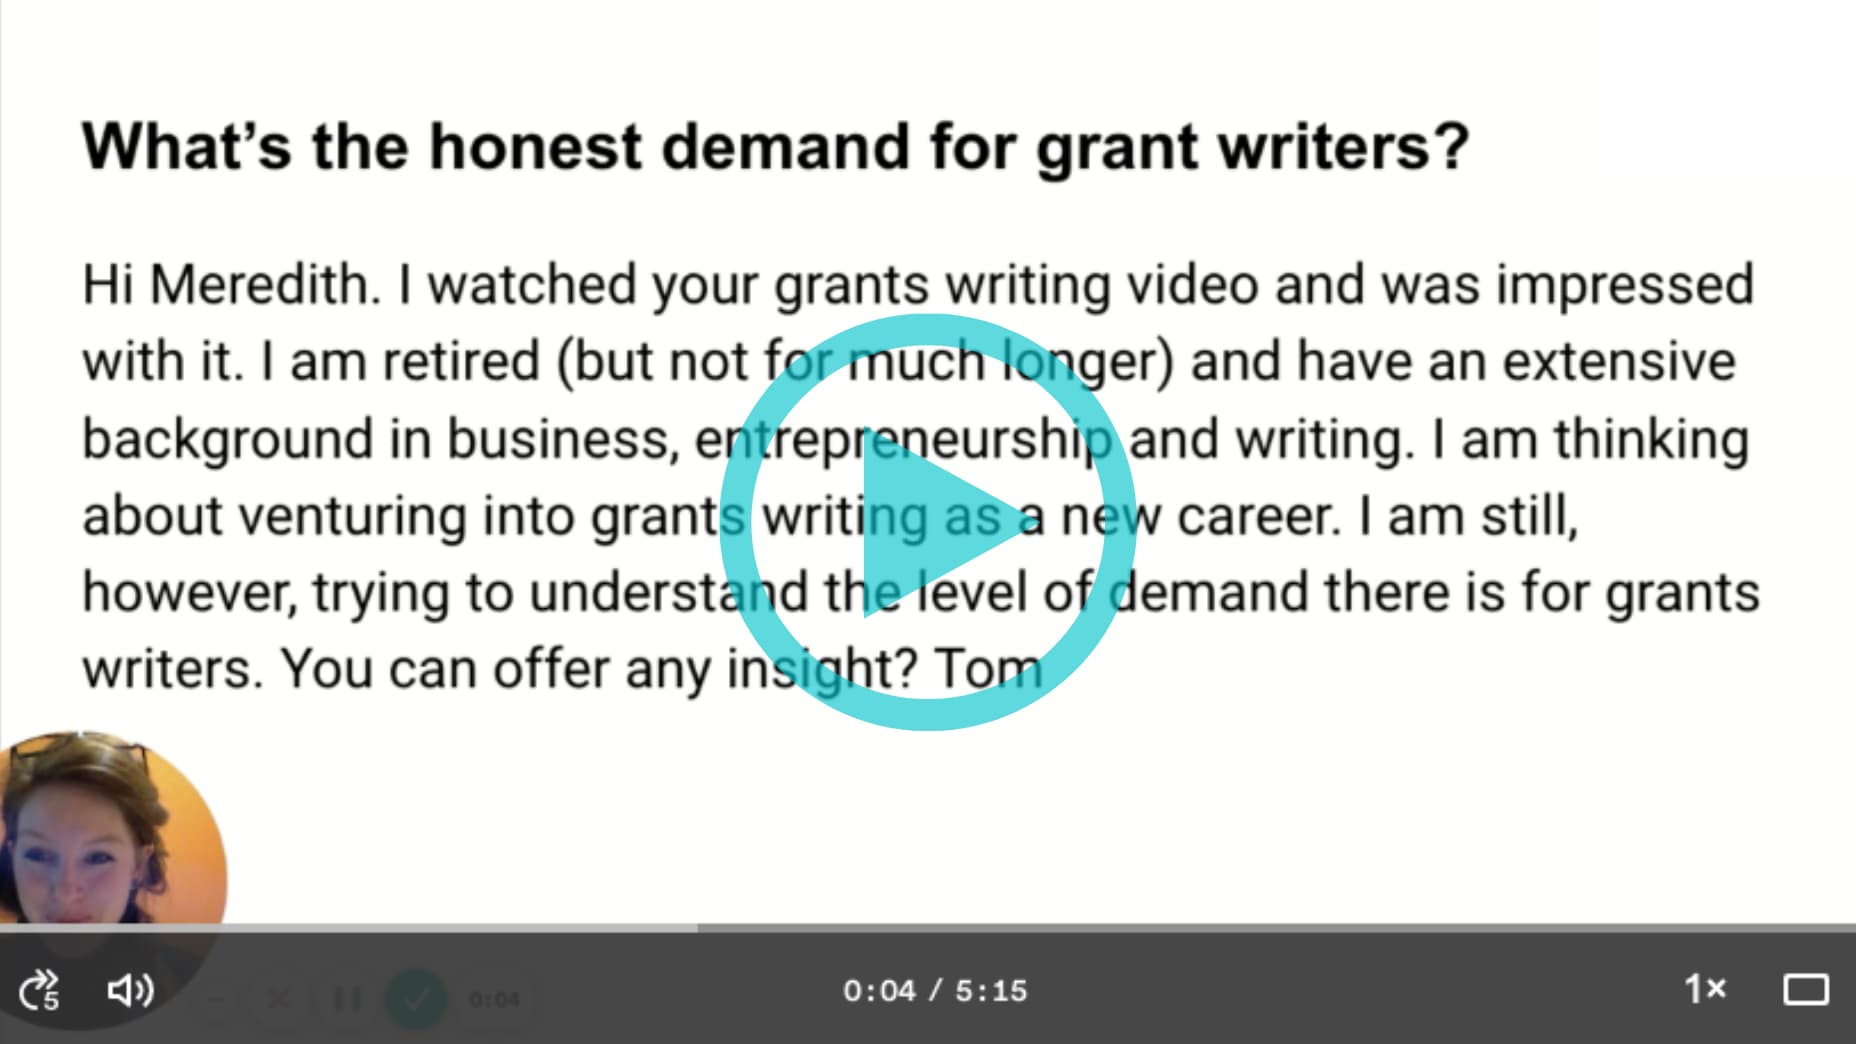 What is the honest demand for grant writers